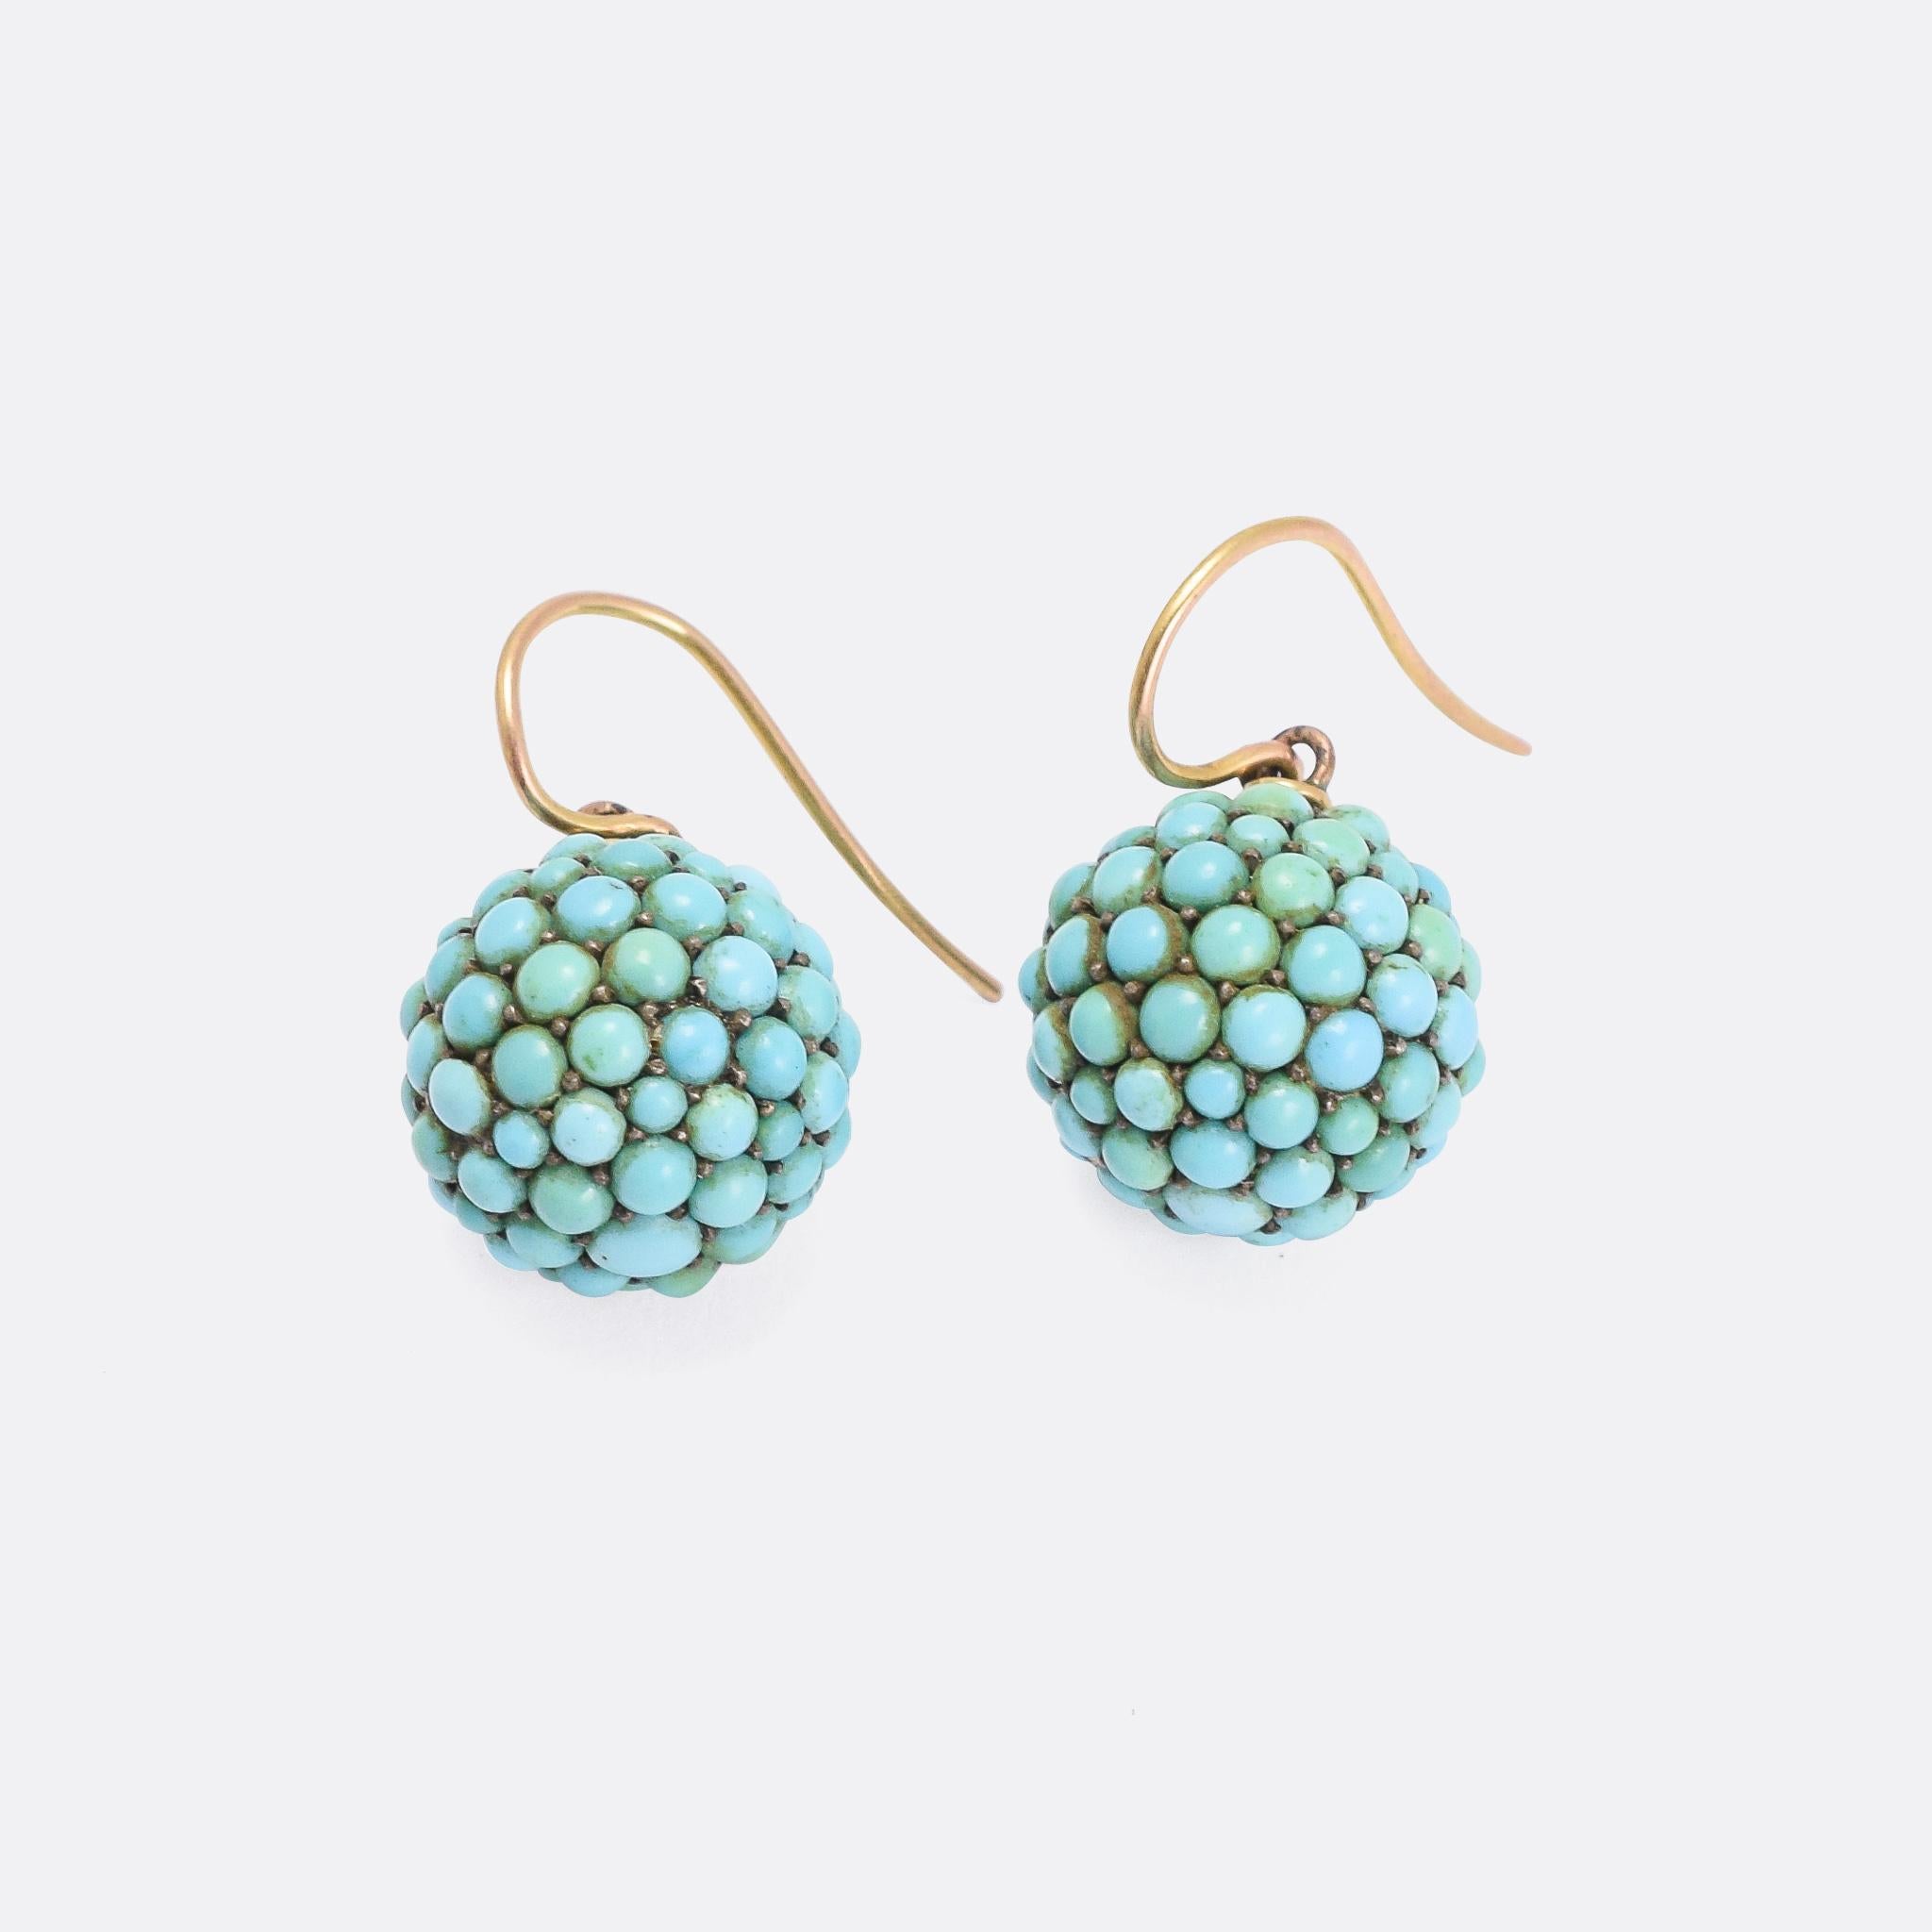 Wonderful antique orb earrings fully pavé set with turquoise cabochons. The date from the mid Victorian period, circa 1870, and remain in fantastic condition. They're a good size at 1.5cm in diameter, and are light enough for comfortable wear.

The